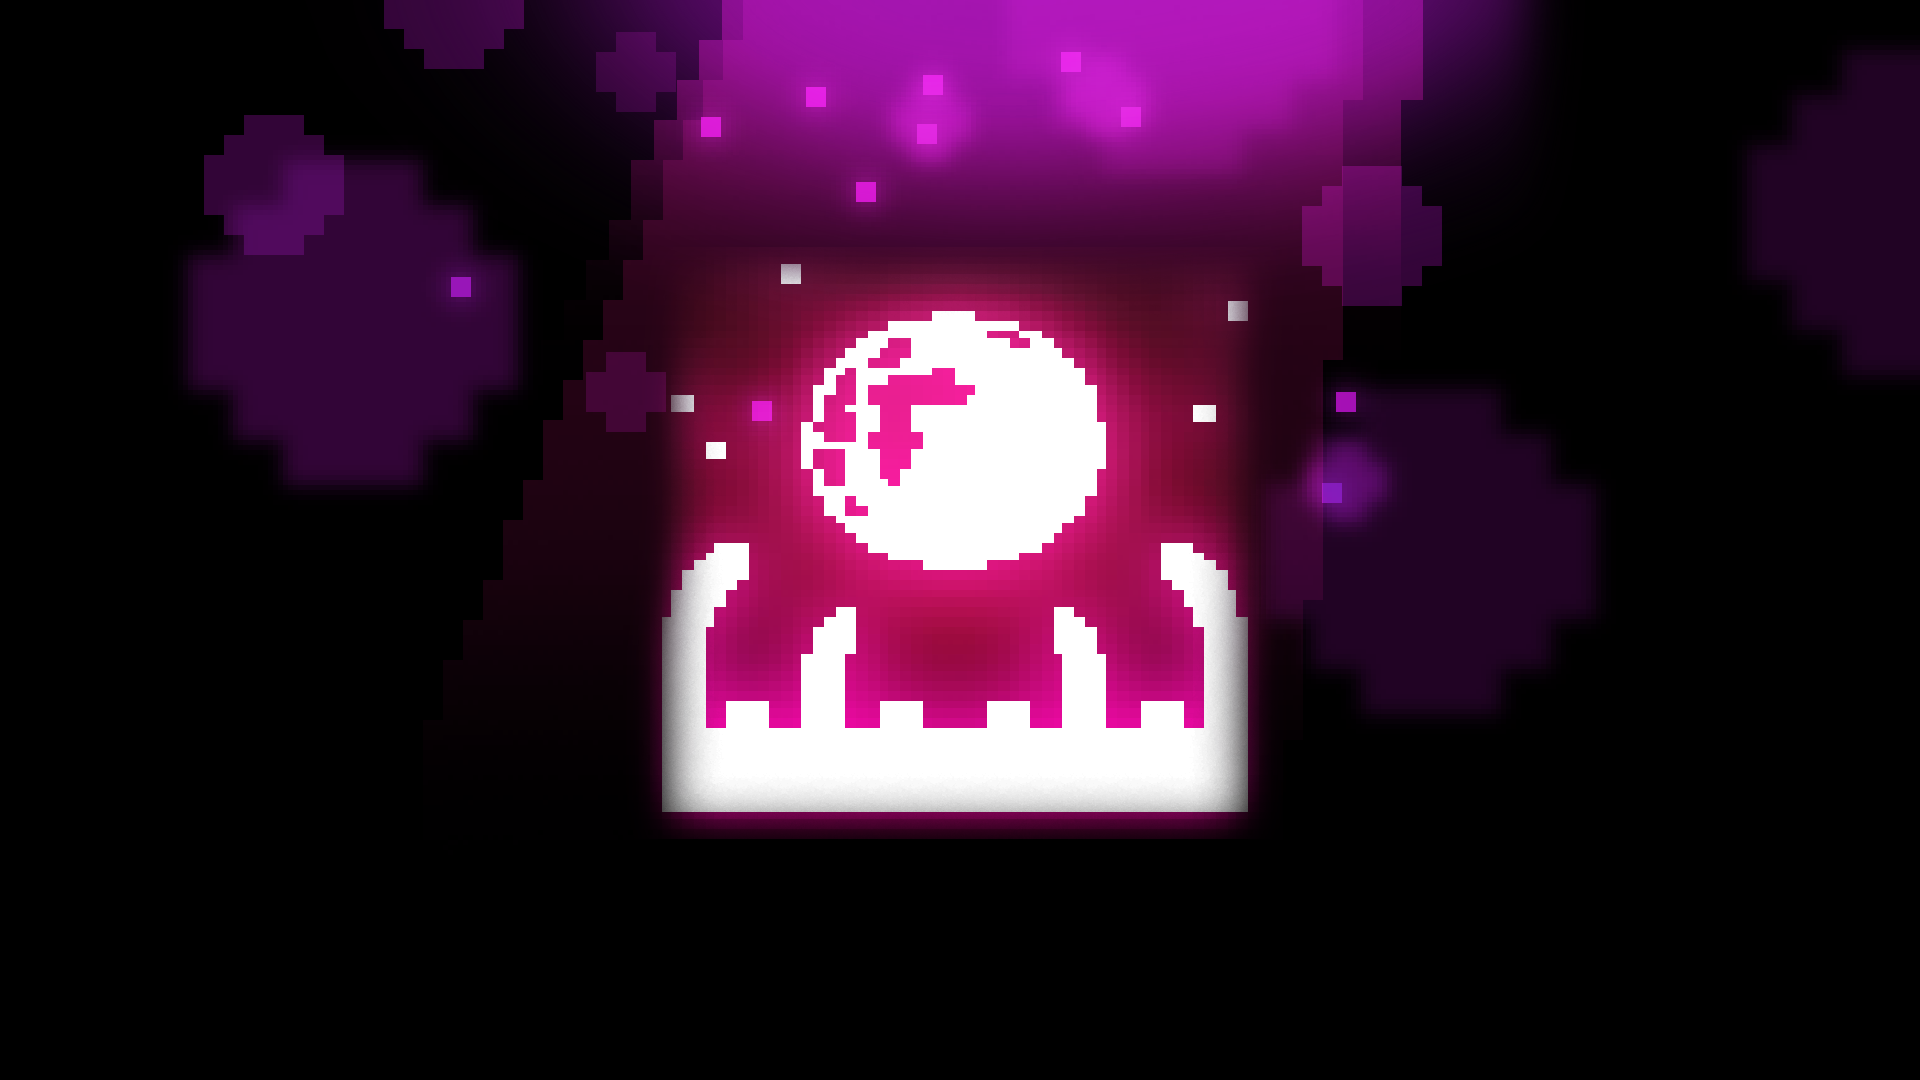 Icon for A sparkle in the night